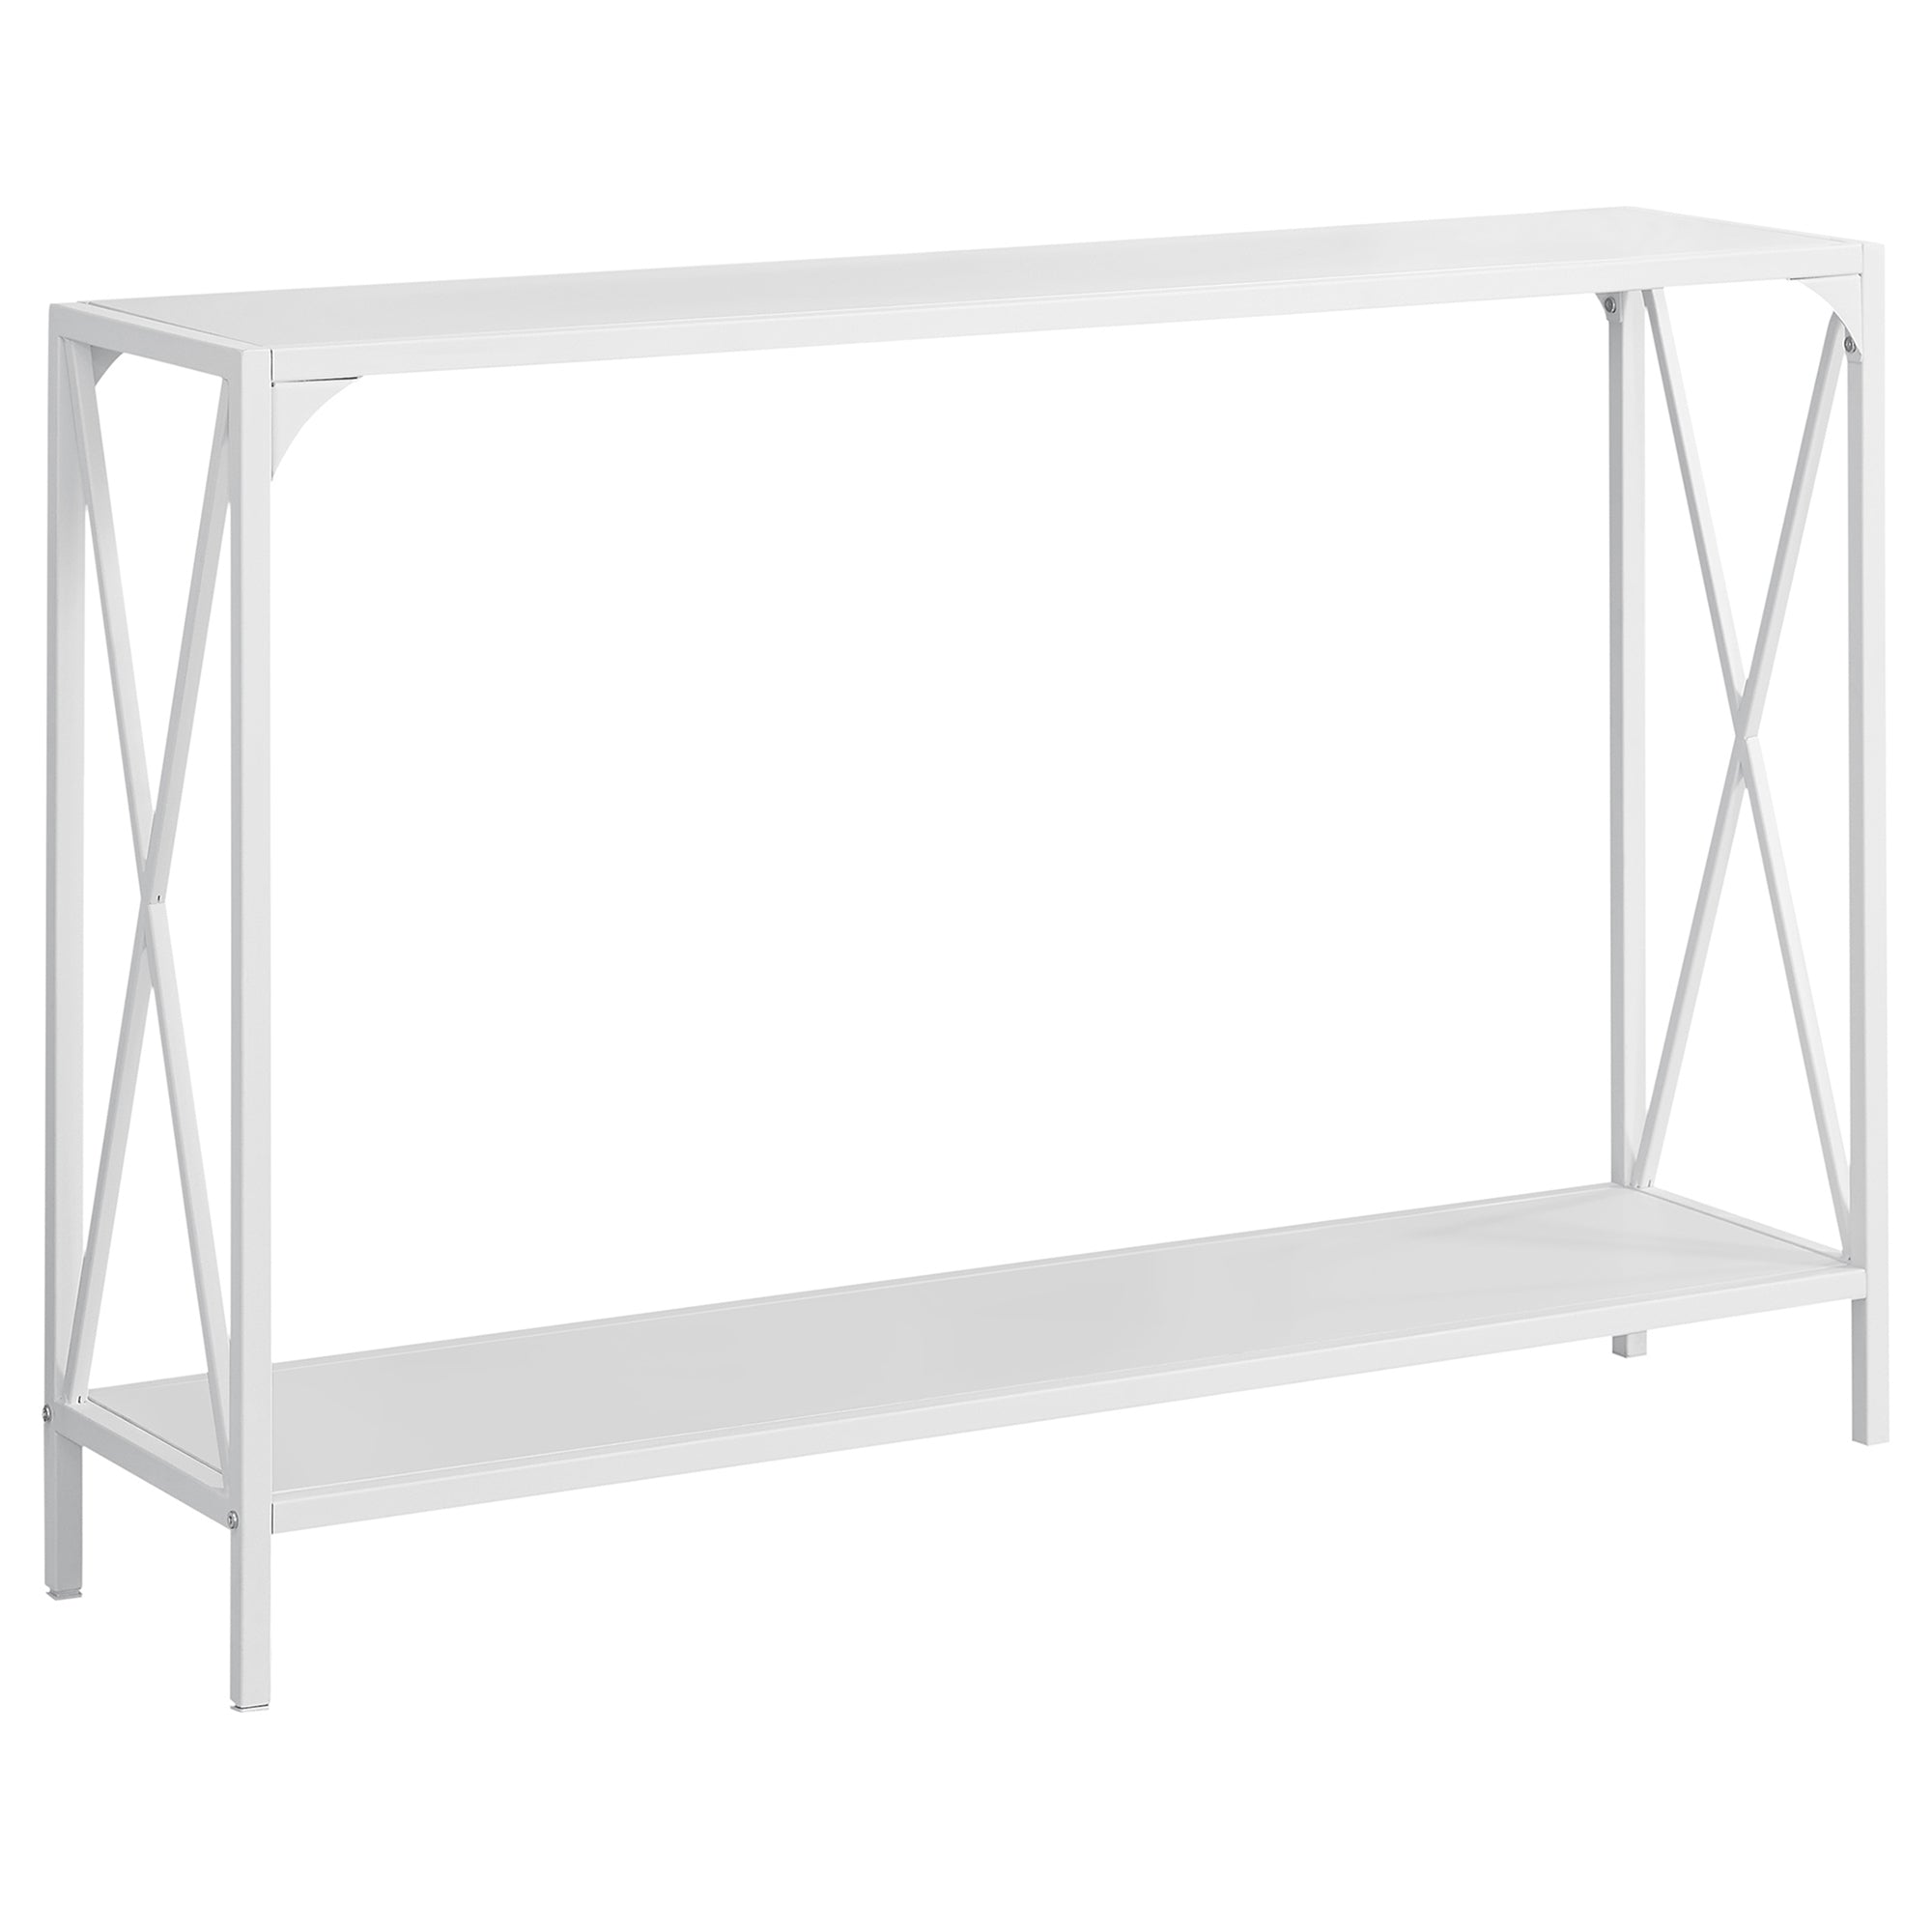 MN-122124    Accent Table, Console, Entryway, Narrow, Sofa, Living Room, Bedroom, Metal Frame, Laminate, White, White, Contemporary, Modern